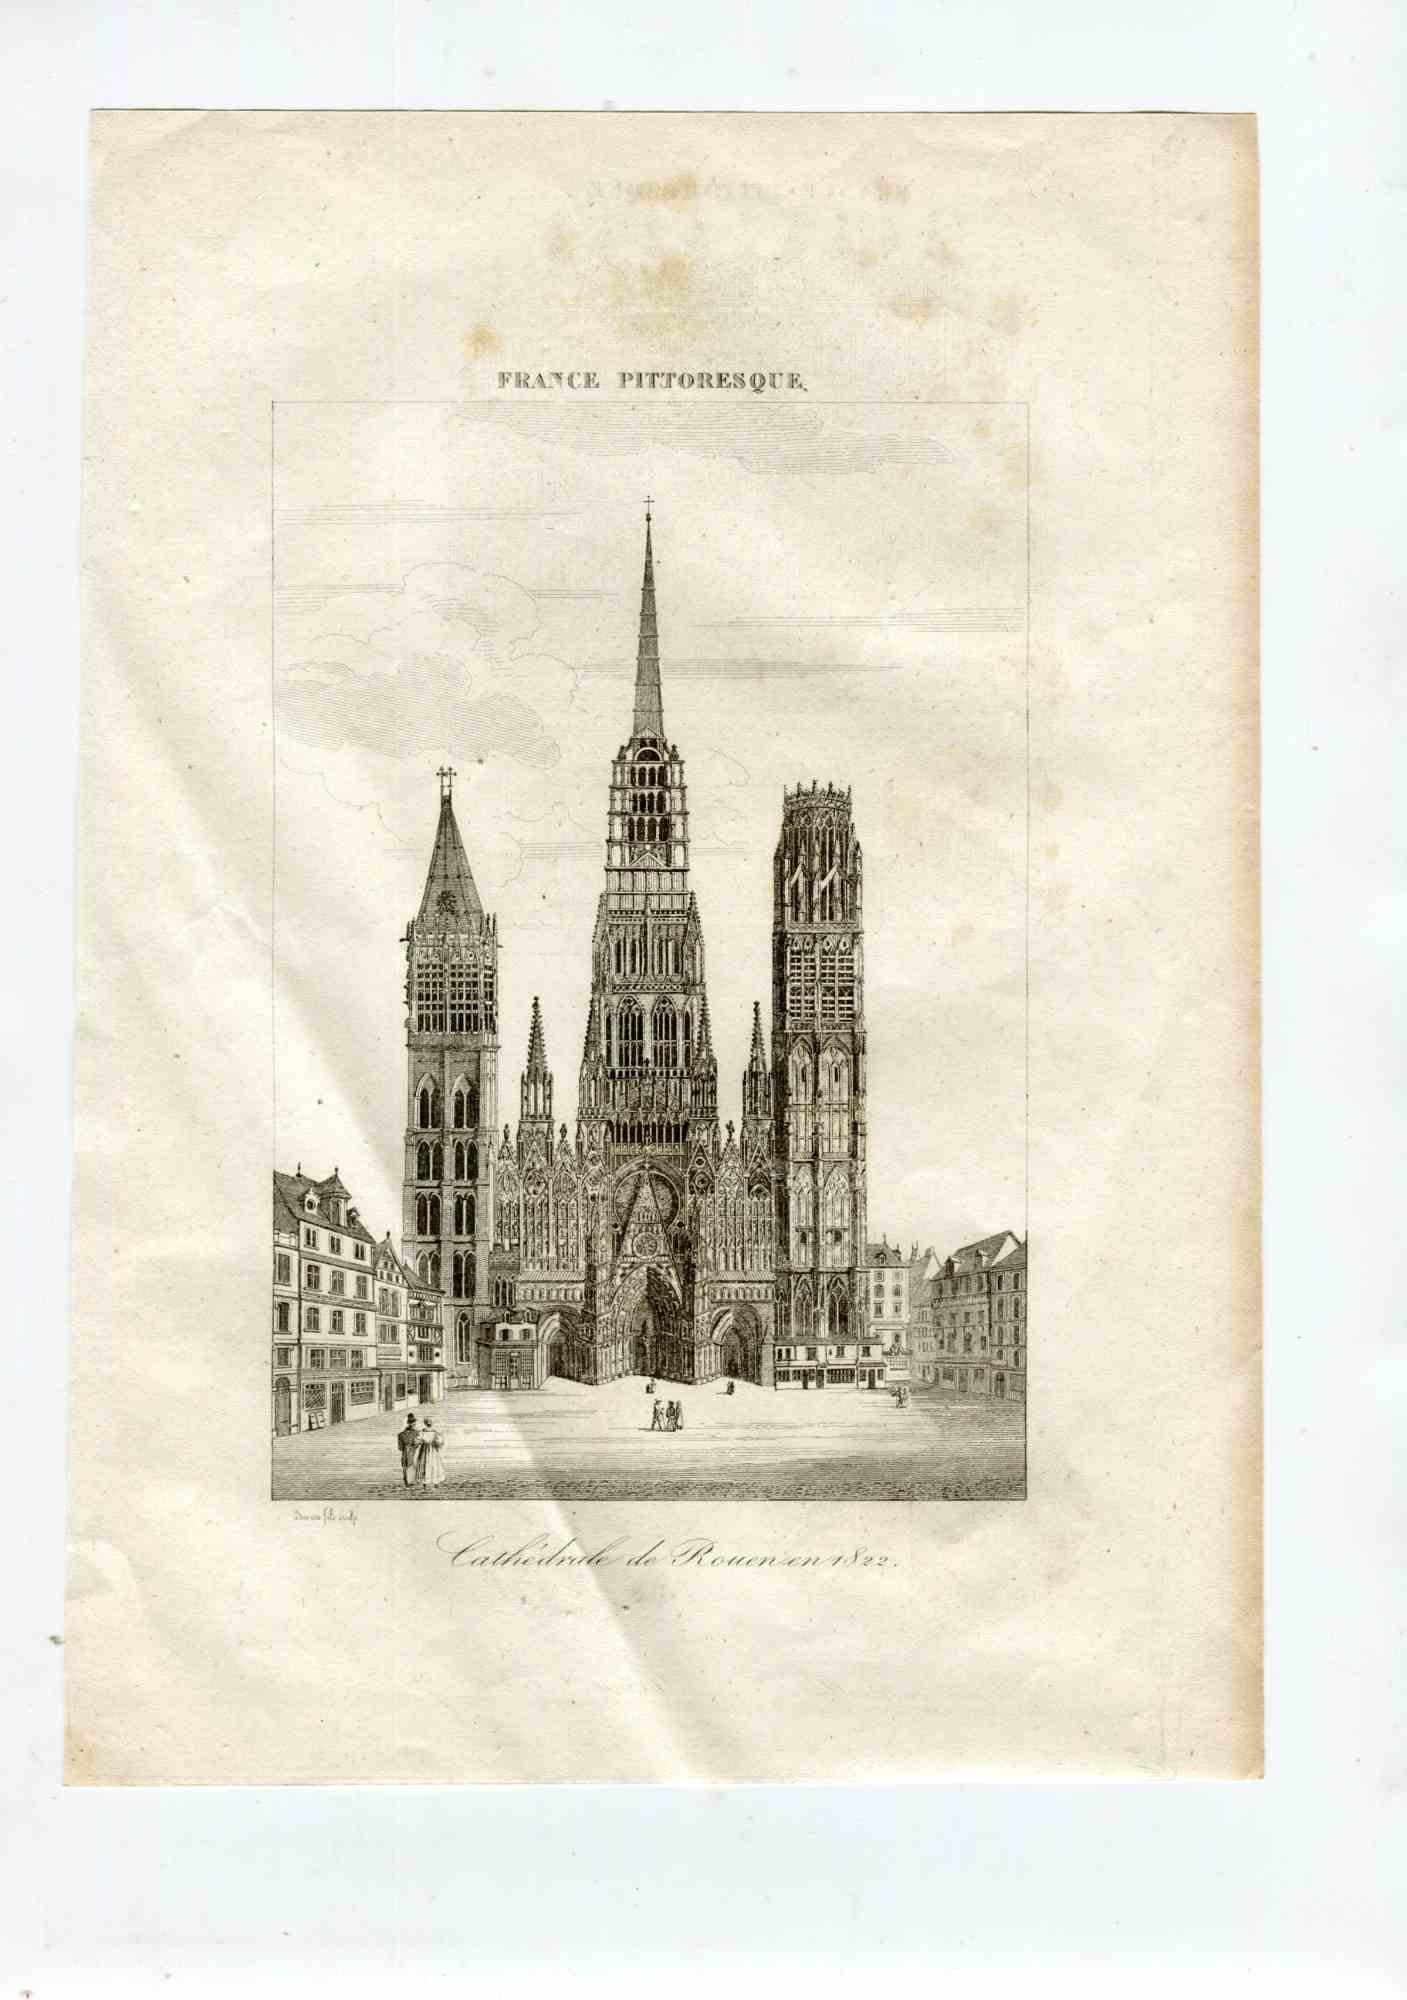 Unknown Figurative Print - View of the Cathedral of Rouen - Original Lithograph - 19th Century